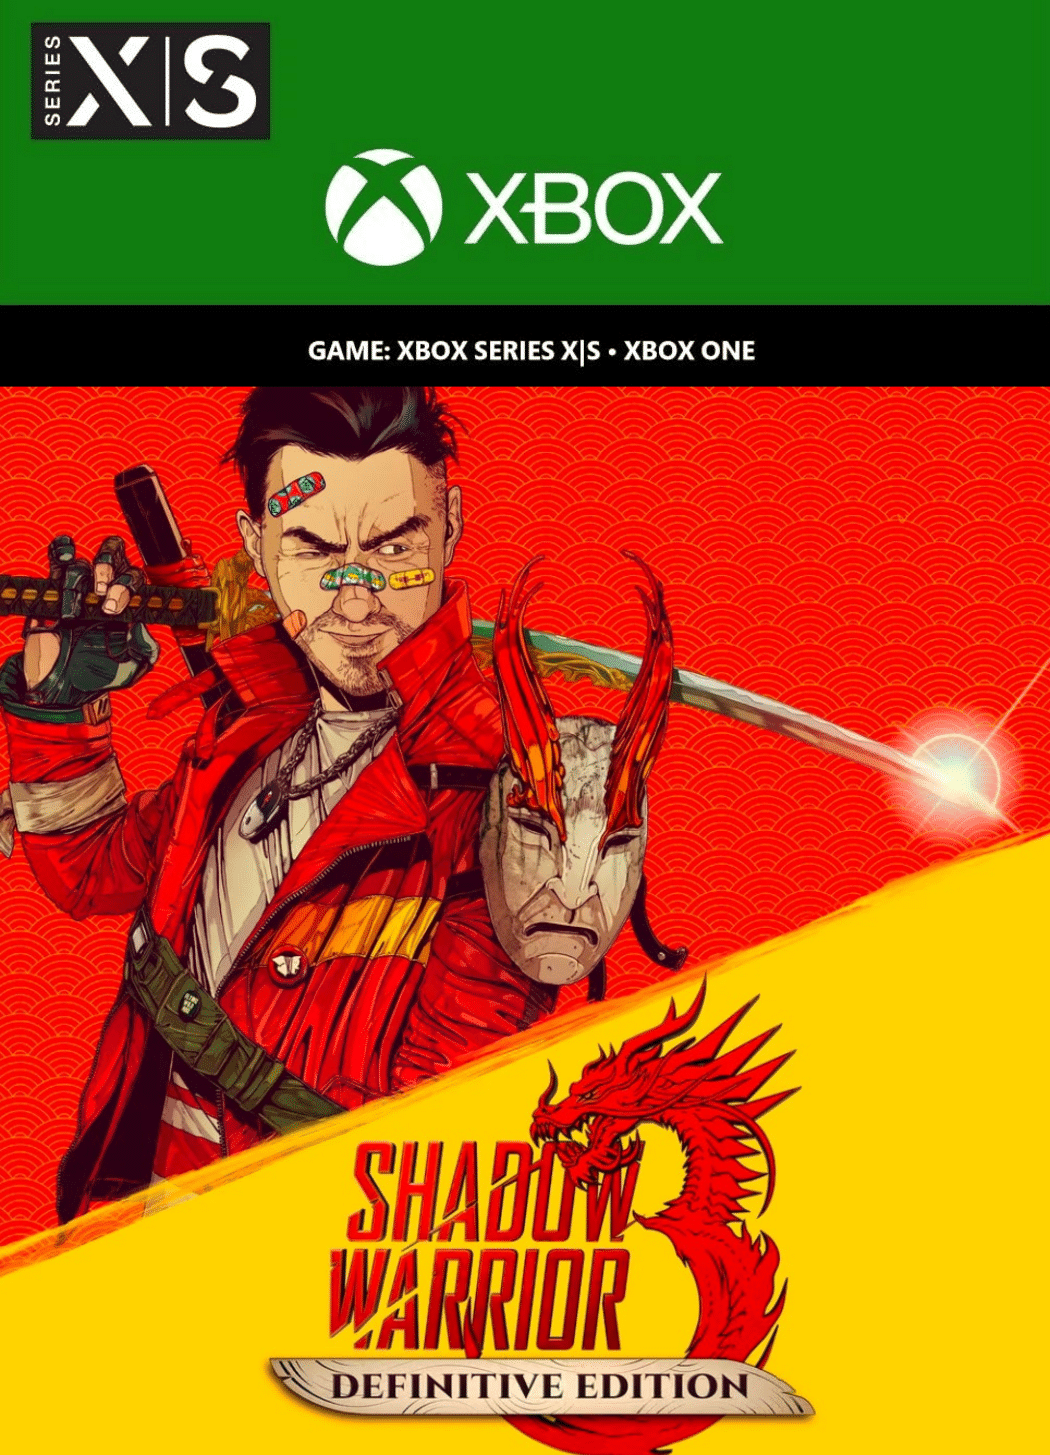 Shadow Warrior 3 is Launching March 1 for Xbox One and Xbox Series